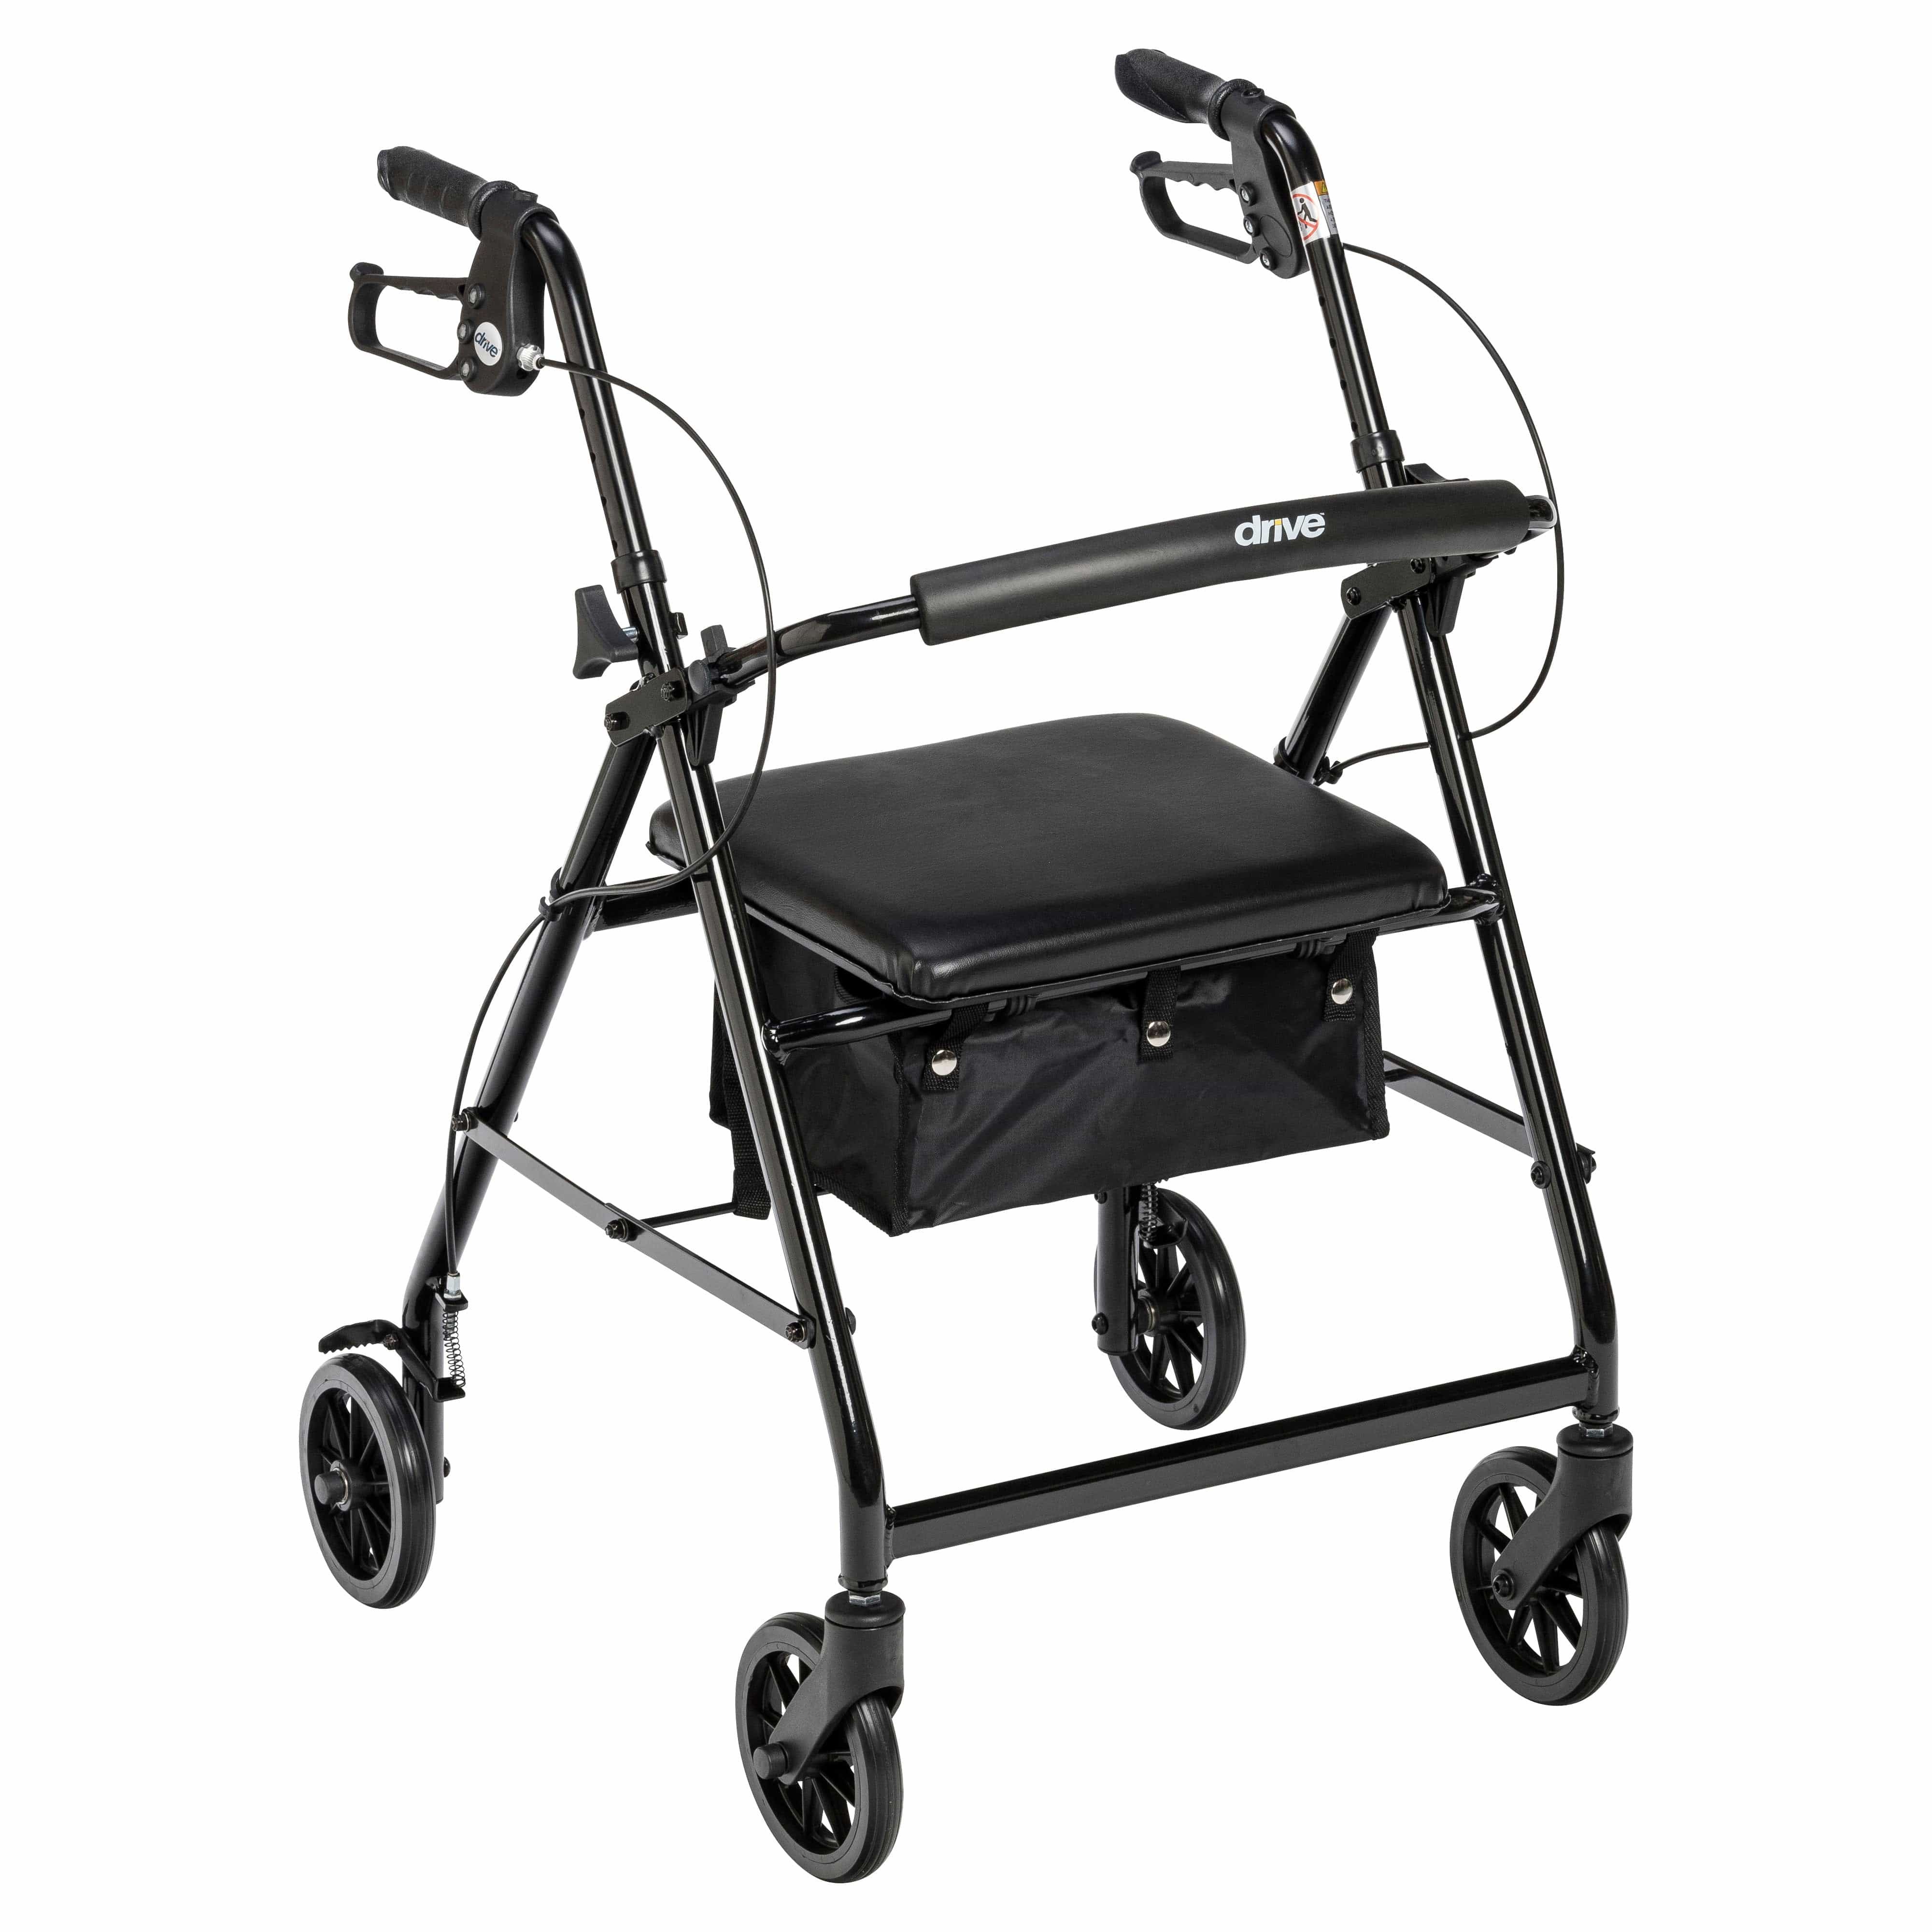 Drive Medical Drive Medical Rollator Rolling Walker with 6" Wheels, Fold Up Removable Back Support and Padded Seat r726bk